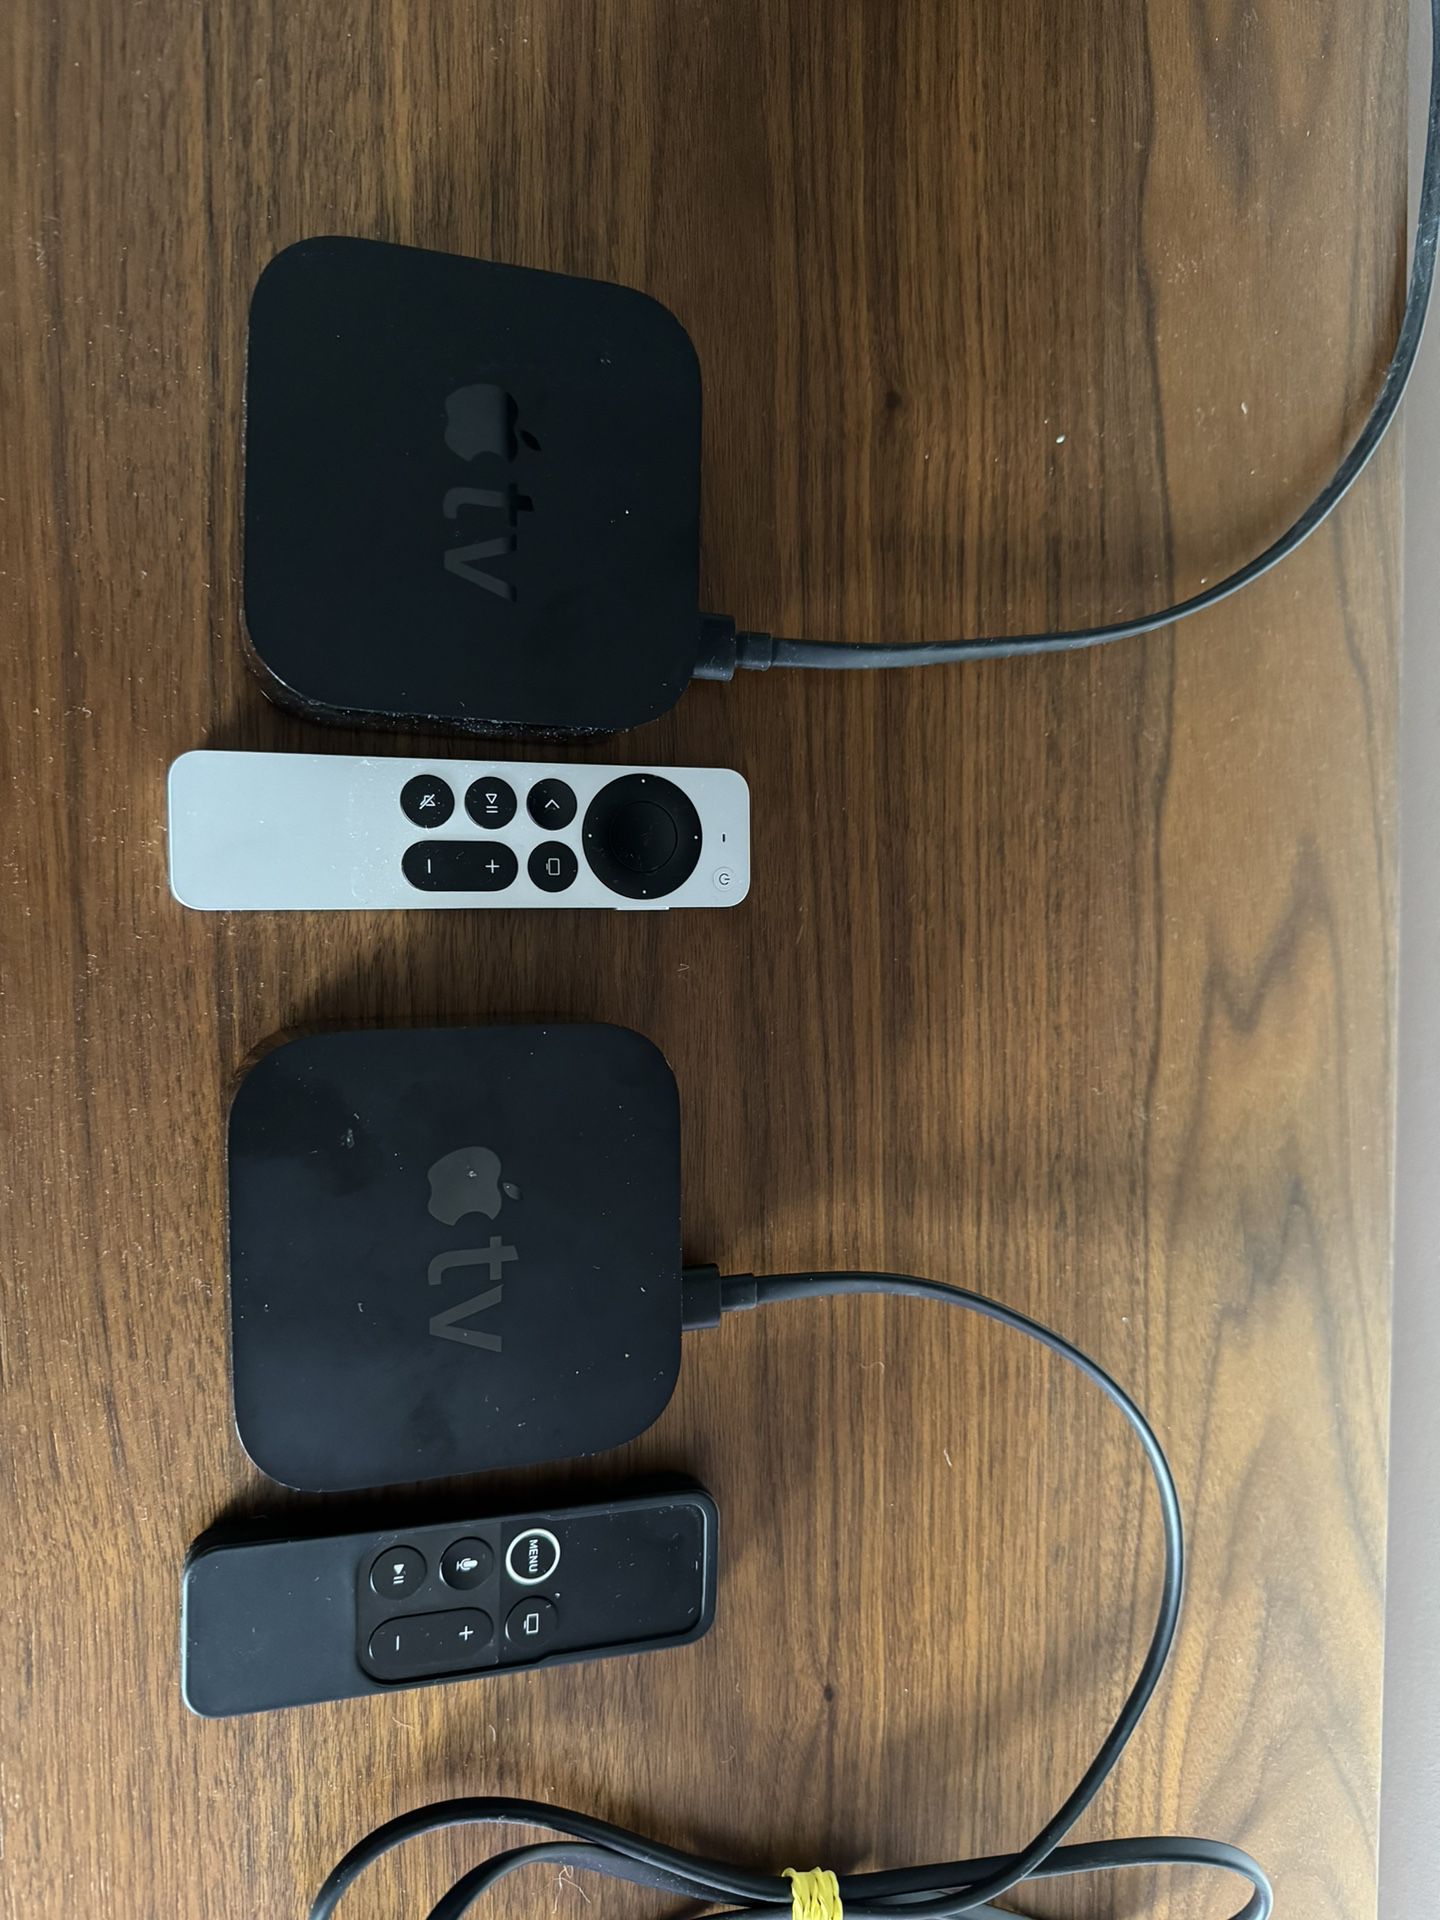 Apple TV (4th Generation) - Excellent Condition/Like New